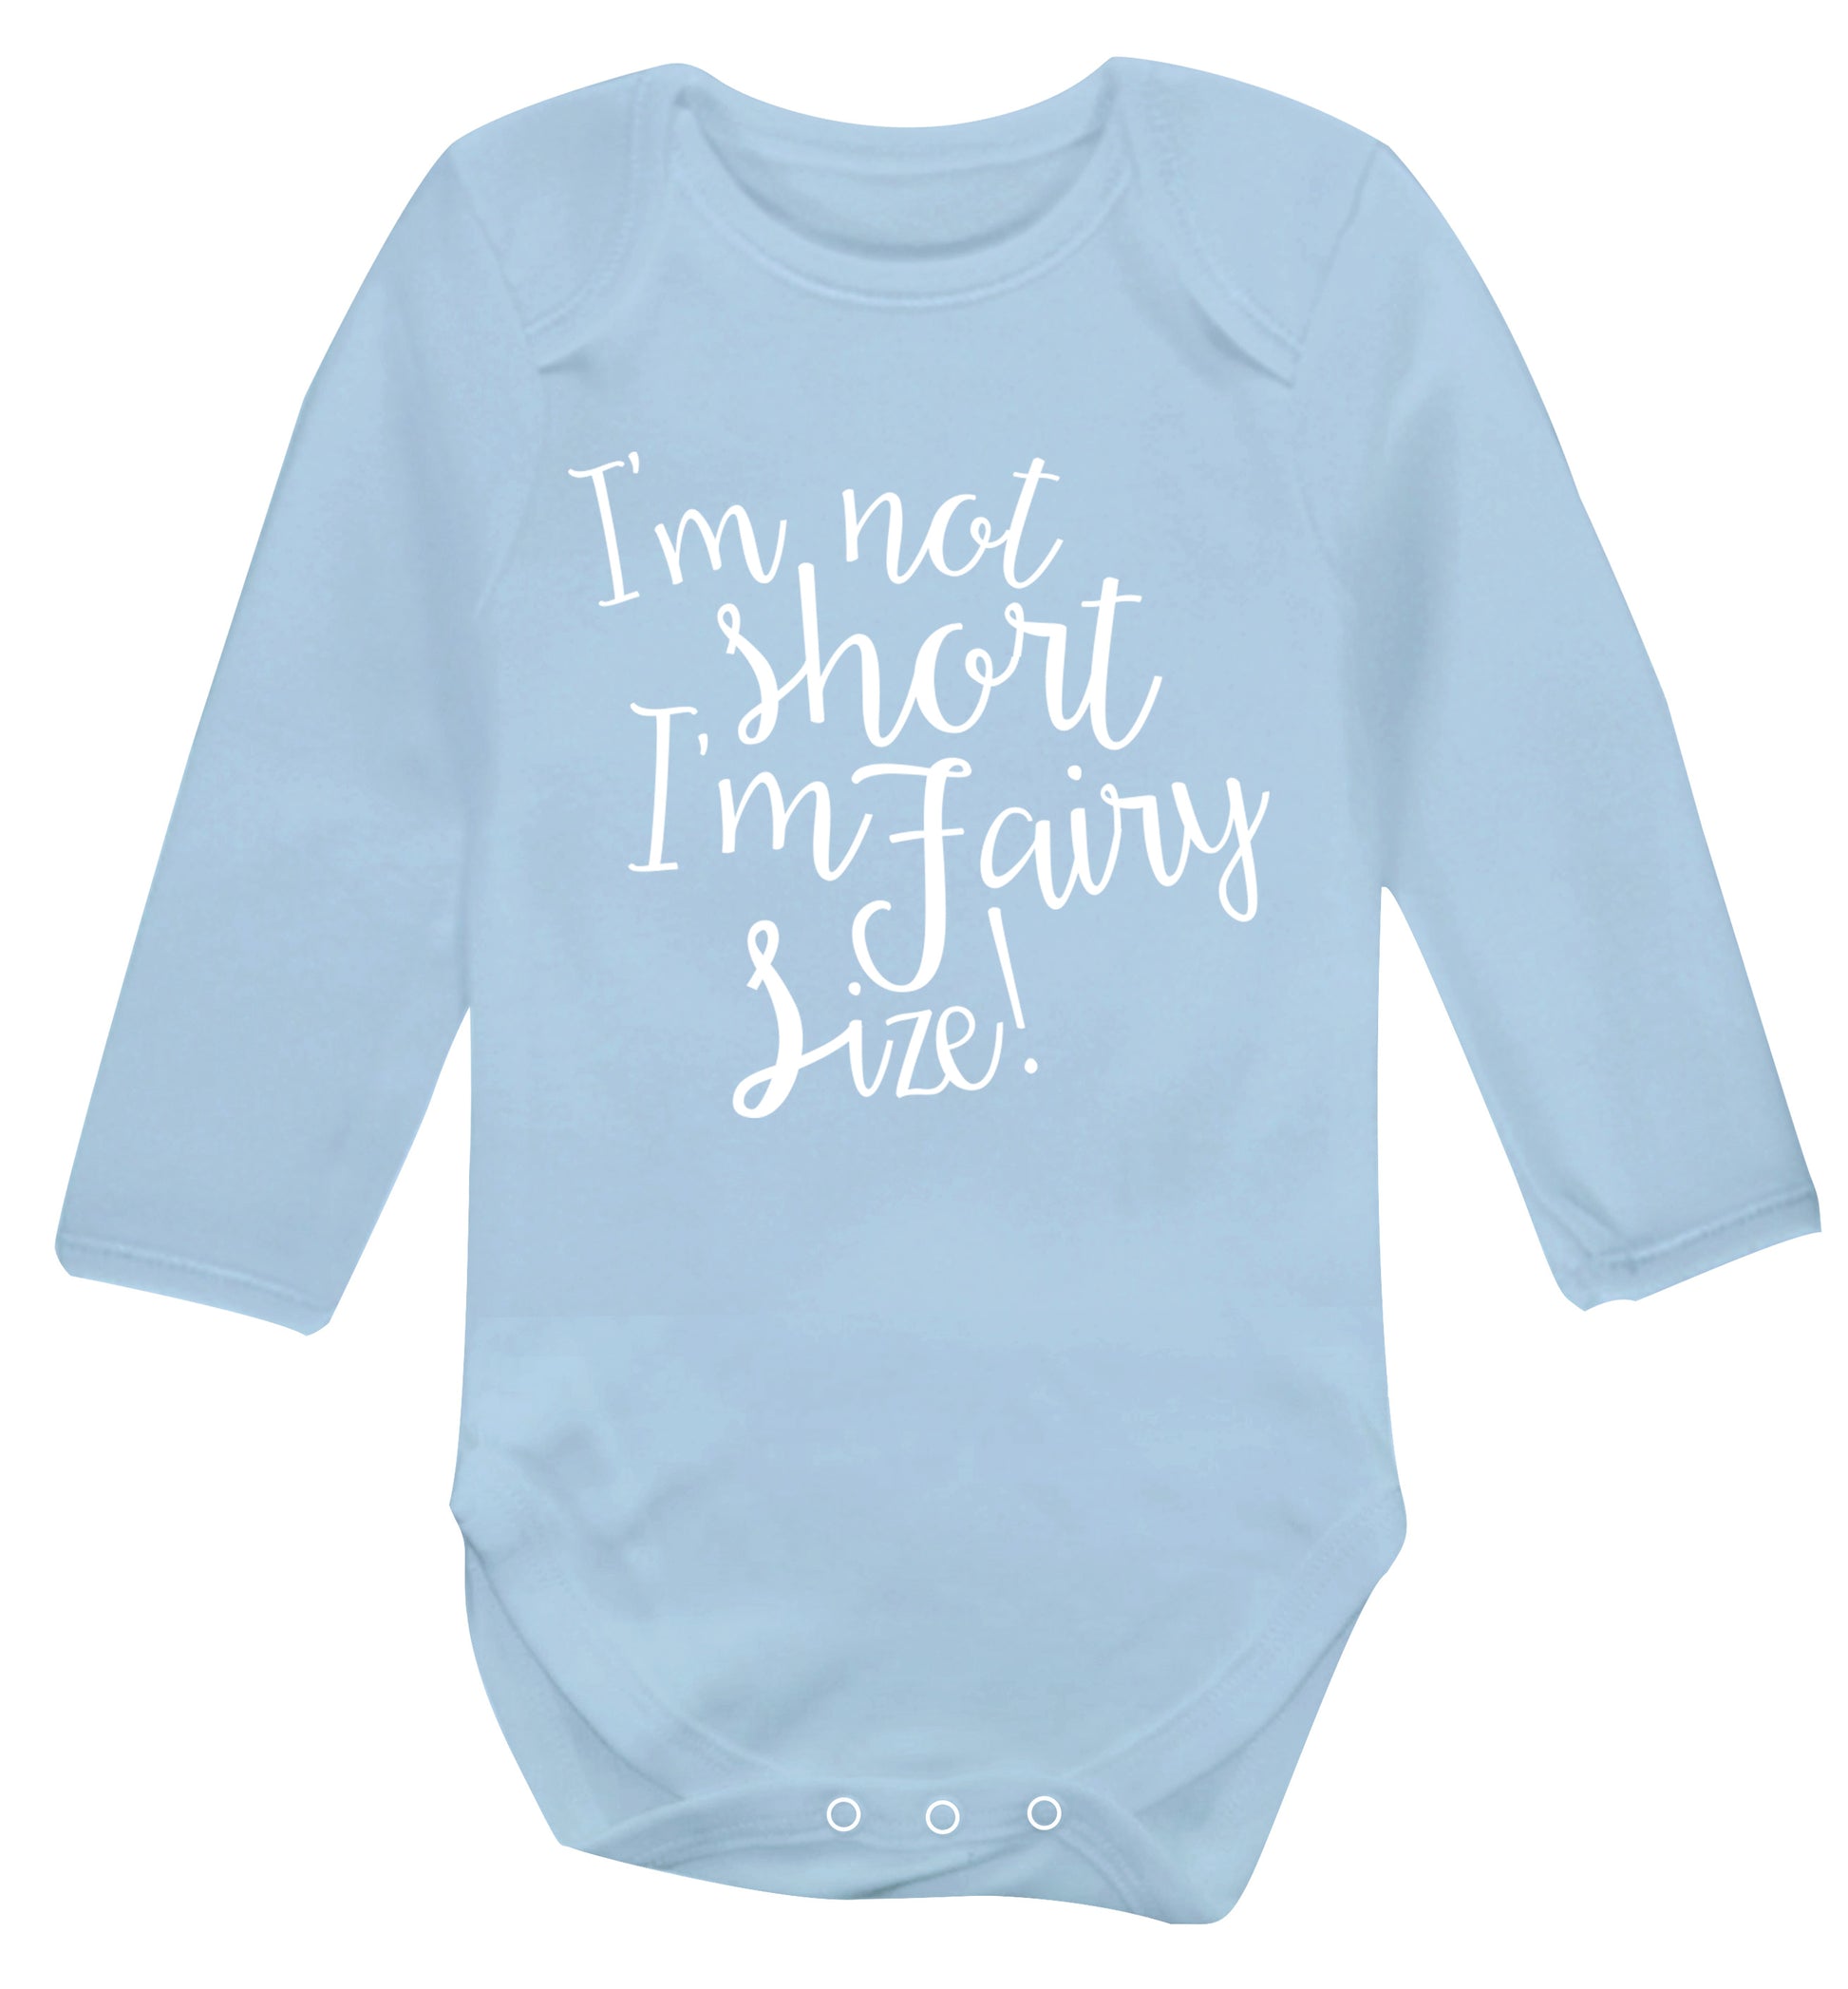 I'm not short I'm fairy sized! Baby Vest long sleeved pale blue 6-12 months